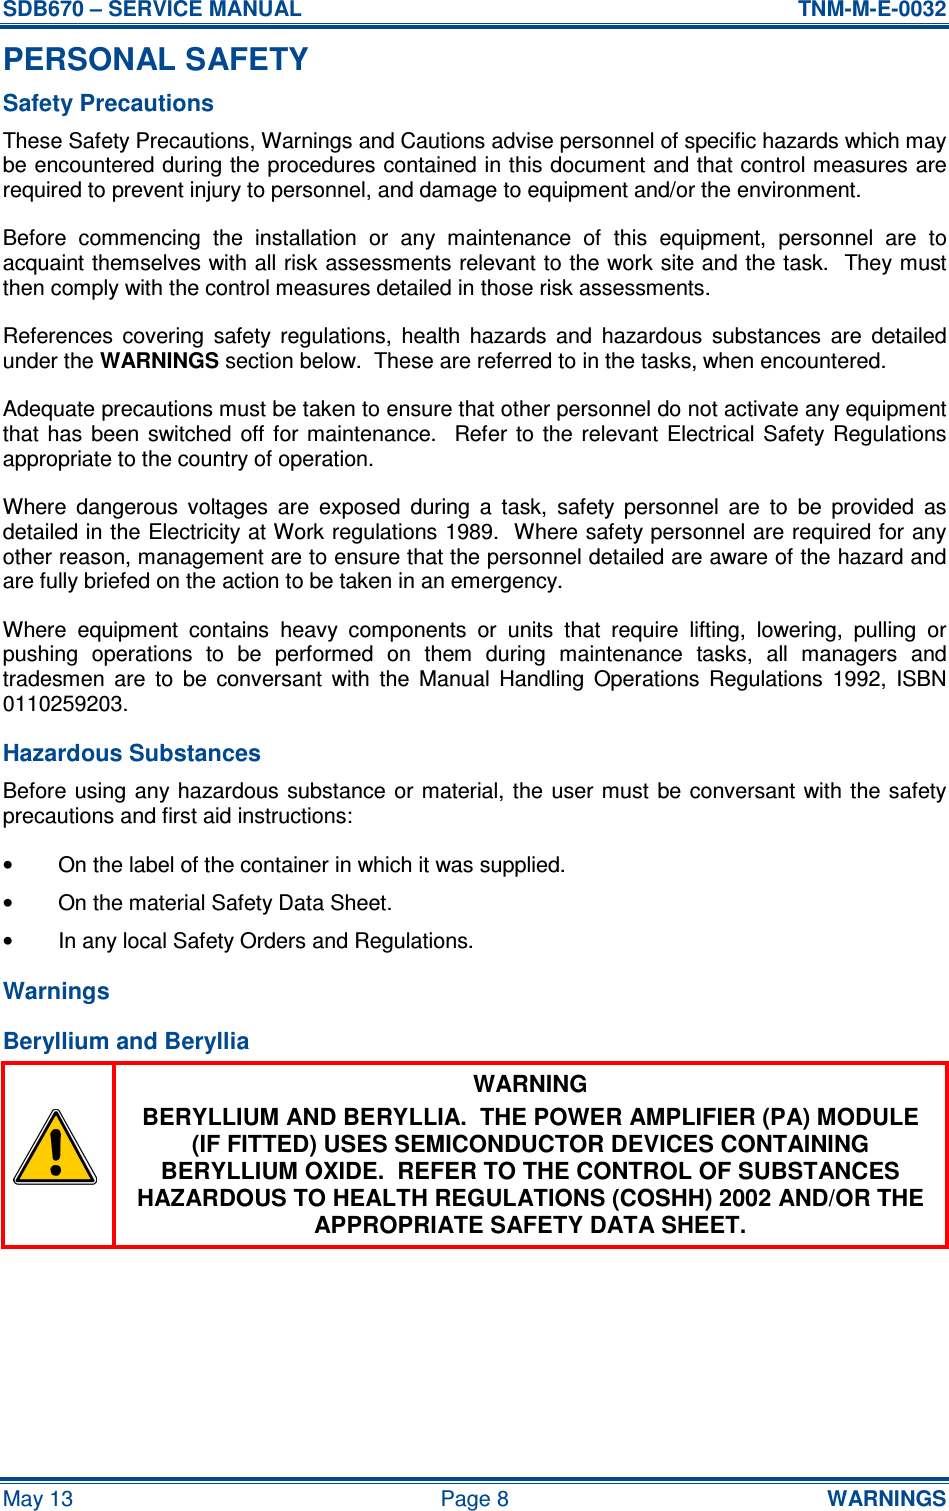 SDB670 – SERVICE MANUAL  TNM-M-E-0032 May 13  Page 8  WARNINGS PERSONAL SAFETY Safety Precautions These Safety Precautions, Warnings and Cautions advise personnel of specific hazards which may be encountered during the procedures contained in this document and that control measures are required to prevent injury to personnel, and damage to equipment and/or the environment. Before  commencing  the  installation  or  any  maintenance  of  this  equipment,  personnel  are  to acquaint themselves with all risk assessments relevant to the work site and the task.  They must then comply with the control measures detailed in those risk assessments. References  covering  safety  regulations,  health  hazards  and  hazardous  substances  are  detailed under the WARNINGS section below.  These are referred to in the tasks, when encountered. Adequate precautions must be taken to ensure that other personnel do not activate any equipment that  has  been  switched  off  for  maintenance.    Refer  to the  relevant  Electrical  Safety  Regulations appropriate to the country of operation. Where  dangerous  voltages  are  exposed  during  a  task,  safety  personnel  are  to  be  provided  as detailed in the Electricity at Work regulations 1989.  Where safety personnel are required for any other reason, management are to ensure that the personnel detailed are aware of the hazard and are fully briefed on the action to be taken in an emergency. Where  equipment  contains  heavy  components  or  units  that  require  lifting,  lowering,  pulling  or pushing  operations  to  be  performed  on  them  during  maintenance  tasks,  all  managers  and tradesmen  are  to  be  conversant  with  the  Manual  Handling  Operations  Regulations  1992,  ISBN 0110259203. Hazardous Substances Before using any hazardous  substance  or material, the  user must  be conversant with the safety precautions and first aid instructions: •  On the label of the container in which it was supplied. •  On the material Safety Data Sheet. •  In any local Safety Orders and Regulations. Warnings Beryllium and Beryllia  WARNING BERYLLIUM AND BERYLLIA.  THE POWER AMPLIFIER (PA) MODULE (IF FITTED) USES SEMICONDUCTOR DEVICES CONTAINING BERYLLIUM OXIDE.  REFER TO THE CONTROL OF SUBSTANCES HAZARDOUS TO HEALTH REGULATIONS (COSHH) 2002 AND/OR THE APPROPRIATE SAFETY DATA SHEET. 